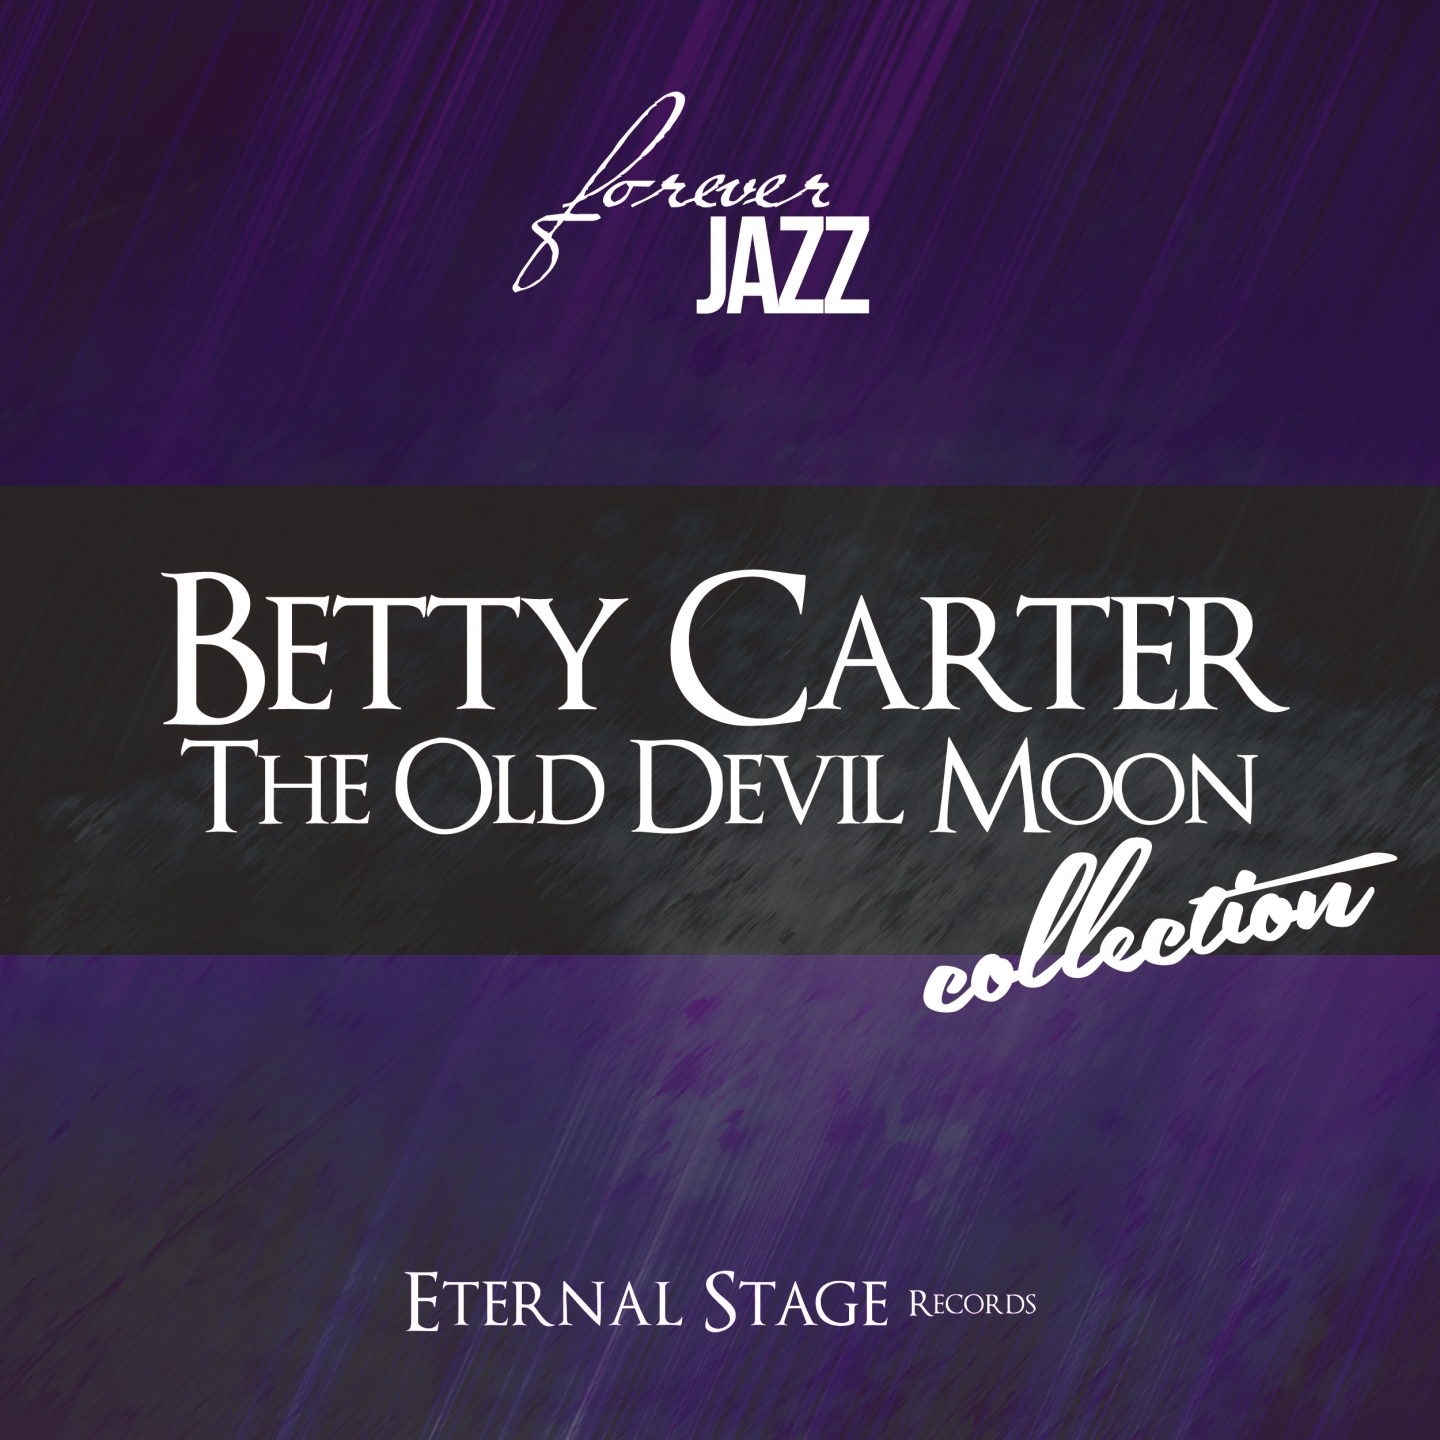 The Old Devil Moon Collection (Forever Jazz)